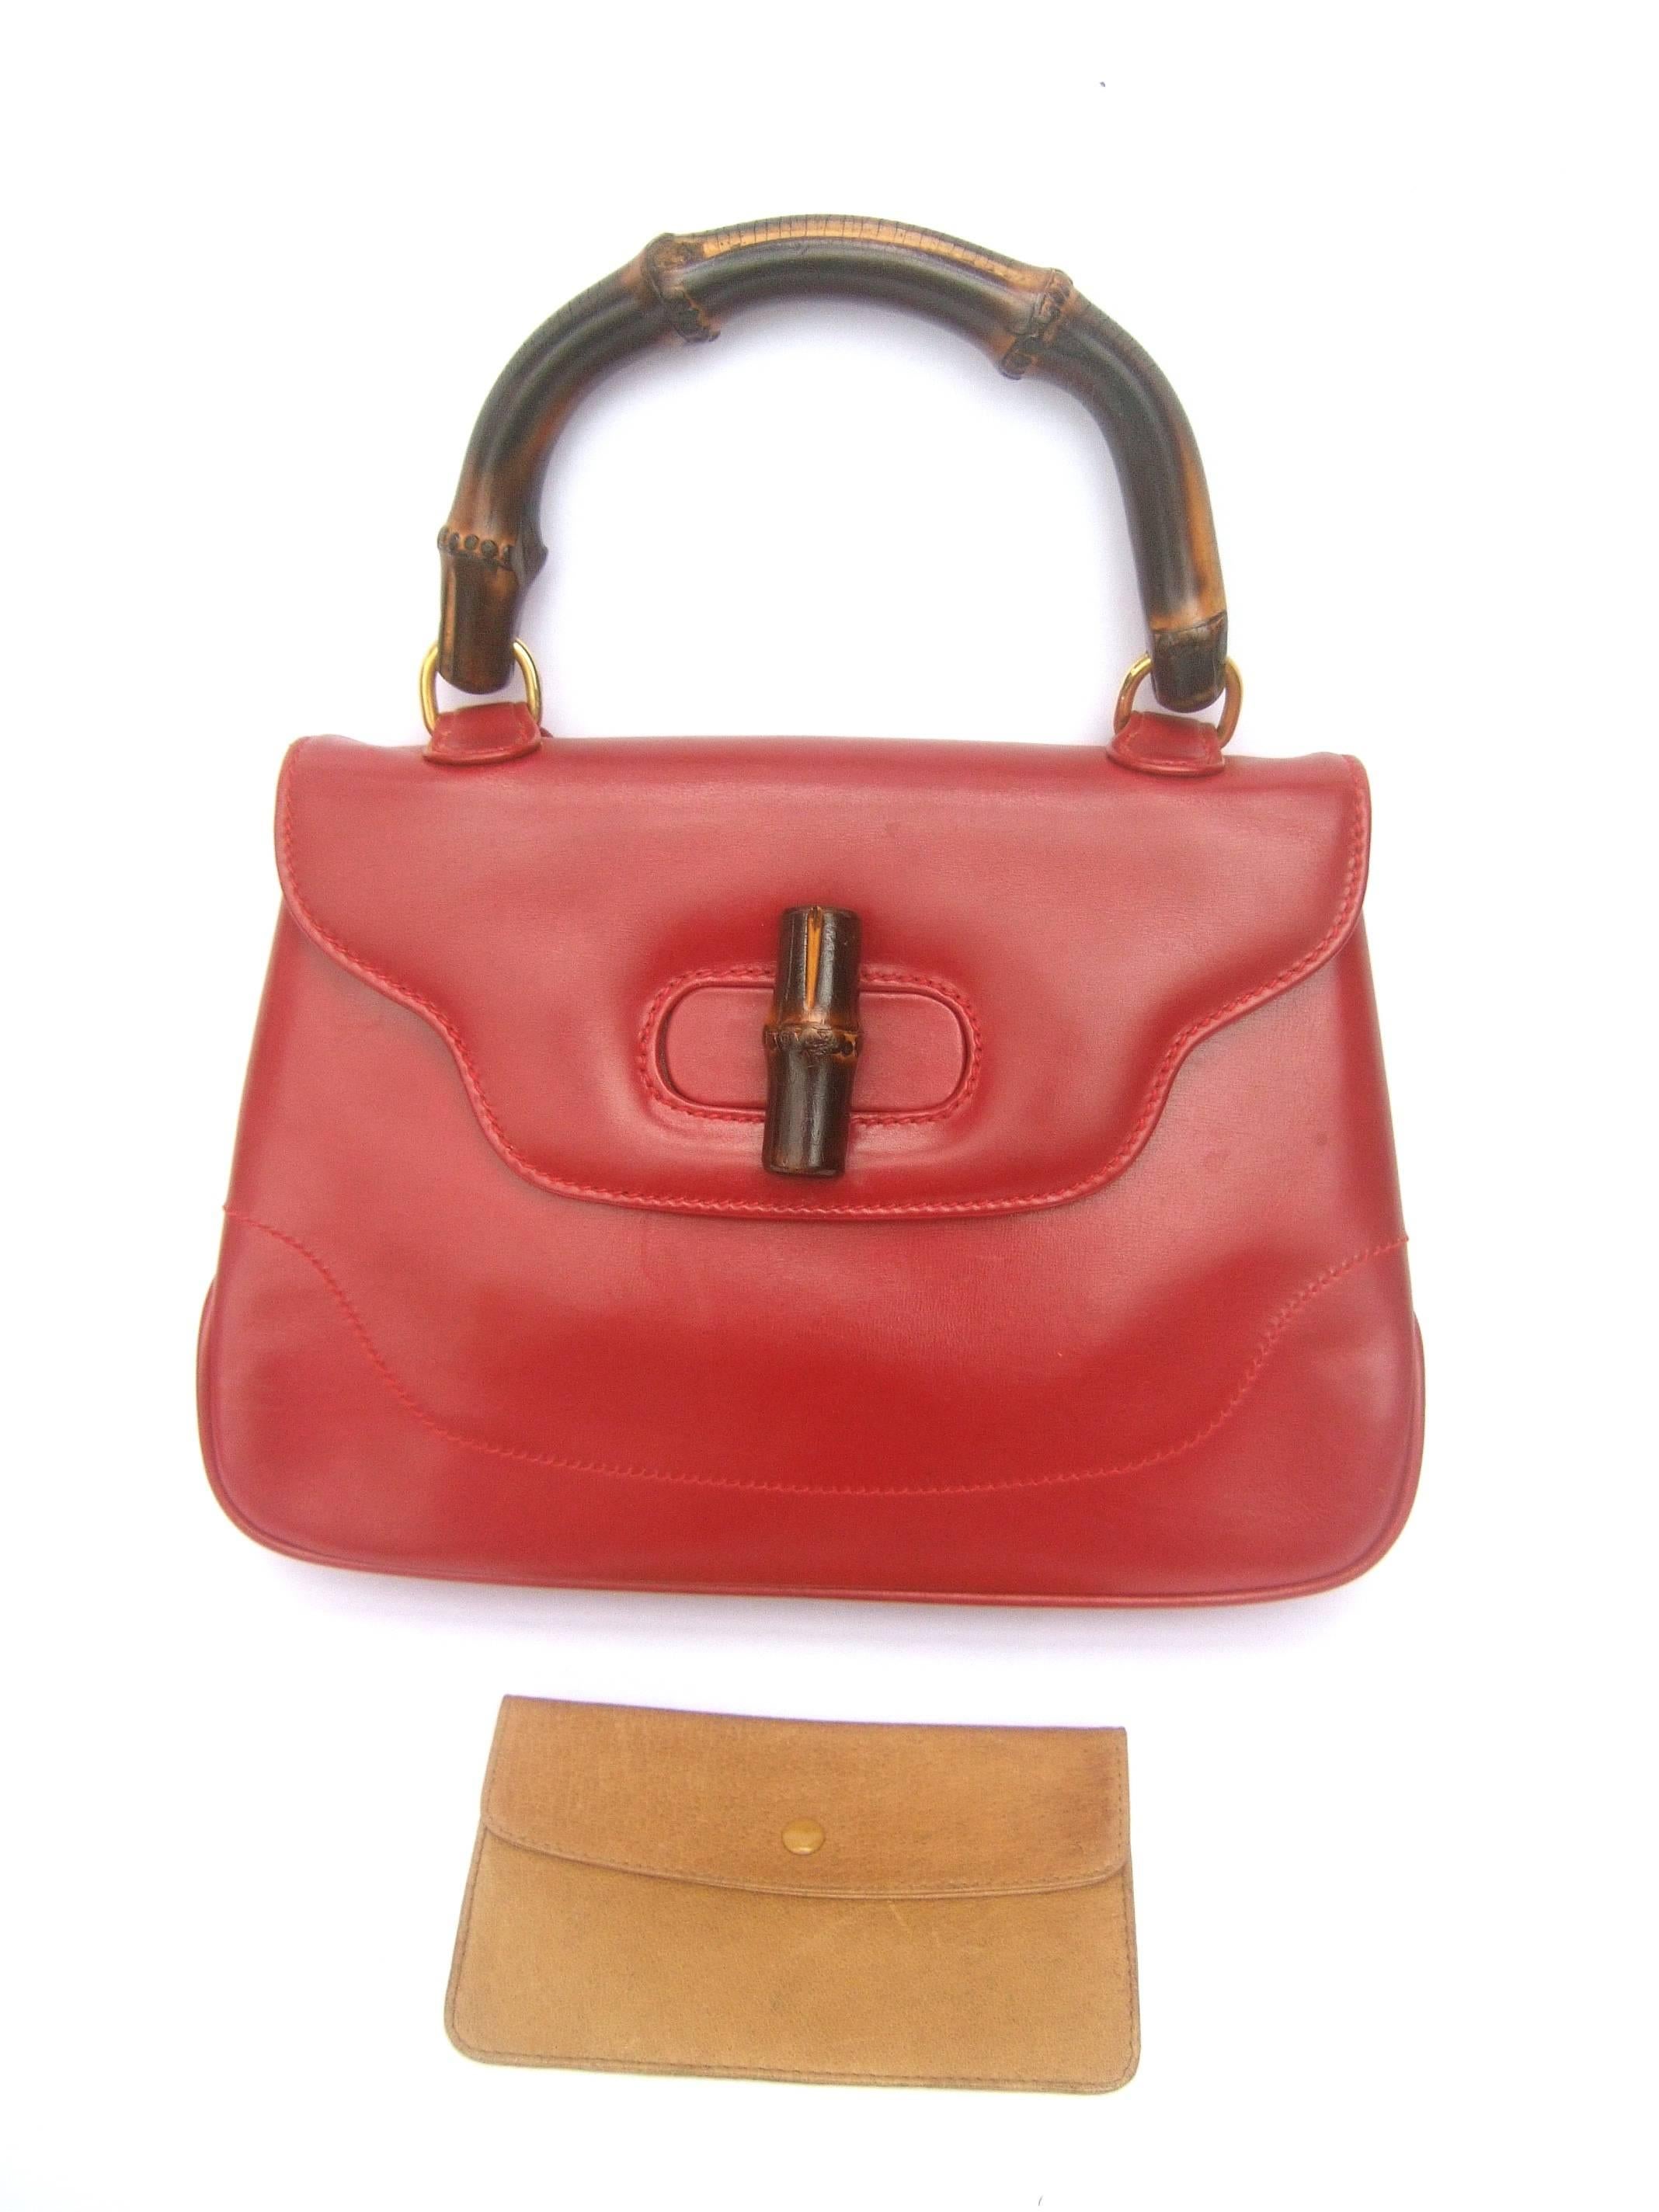 Women's Gucci Italy Iconic Cherry Red Leather Bamboo Handbag in Box 